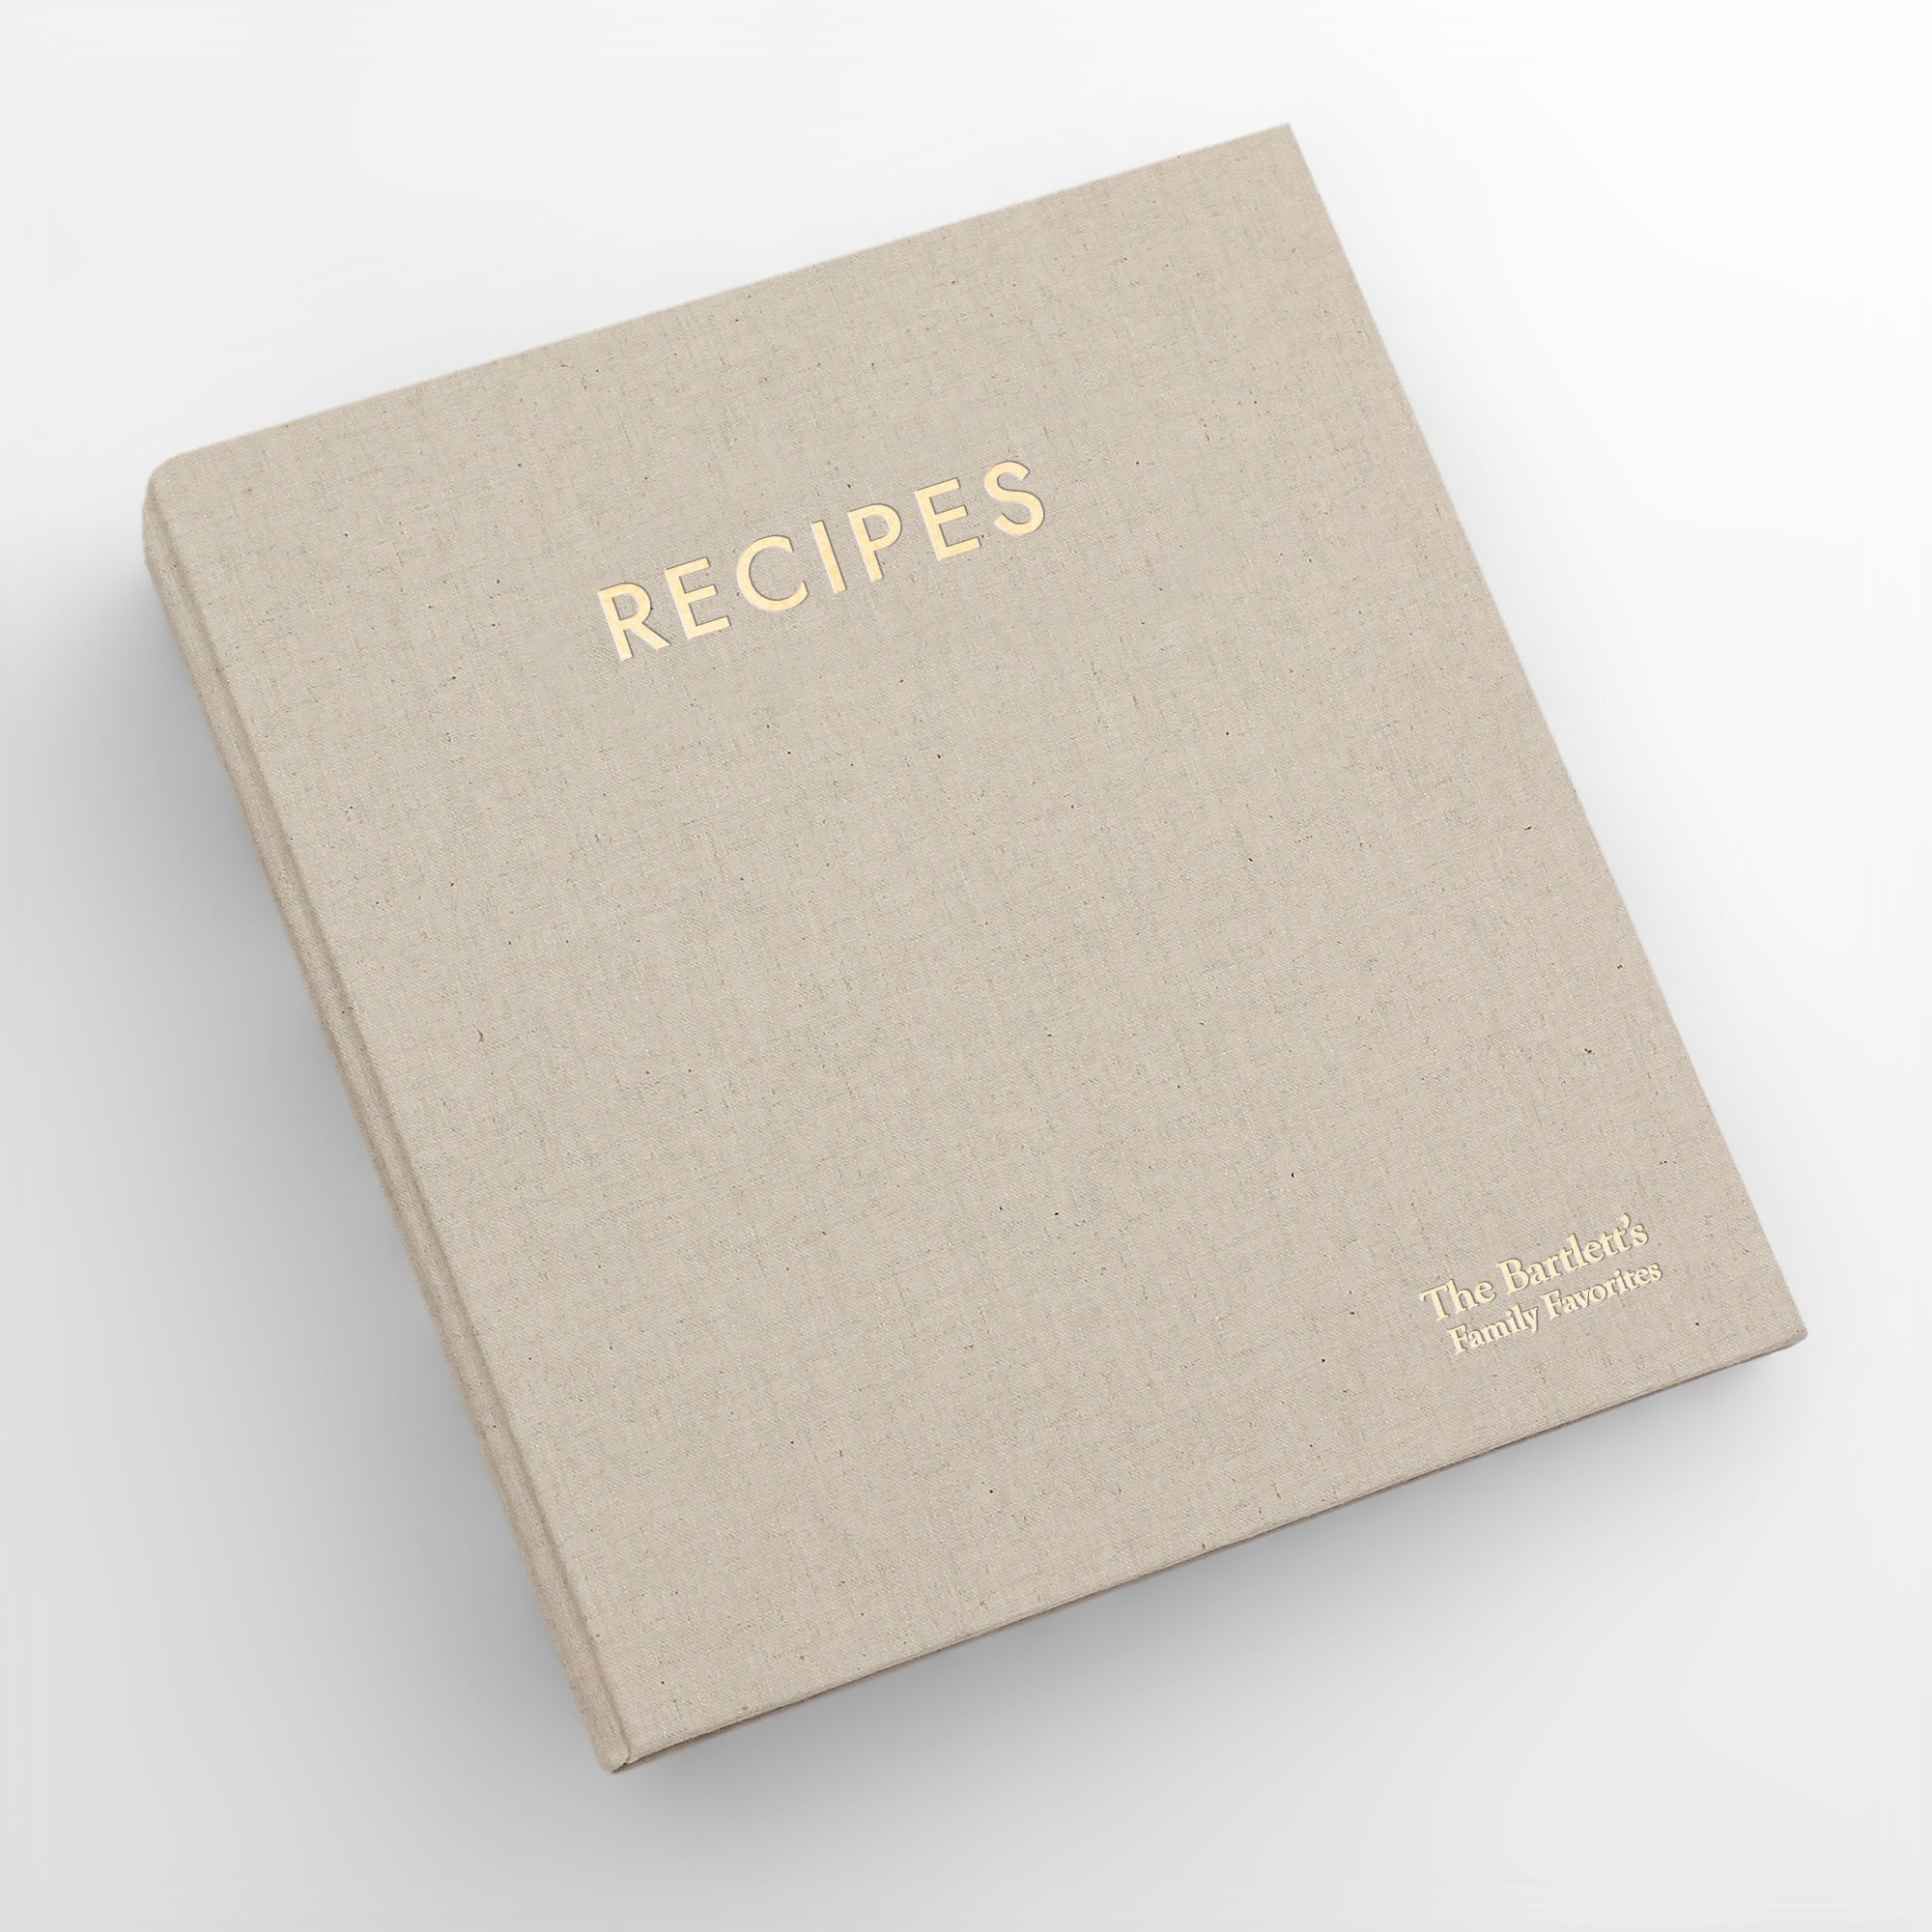 My Recipes: Blank Recipe Book To Write In Your Own Recipes, Family Recipe  Notebook Journal, Blank Cookbook To Write In, Create You (Paperback)